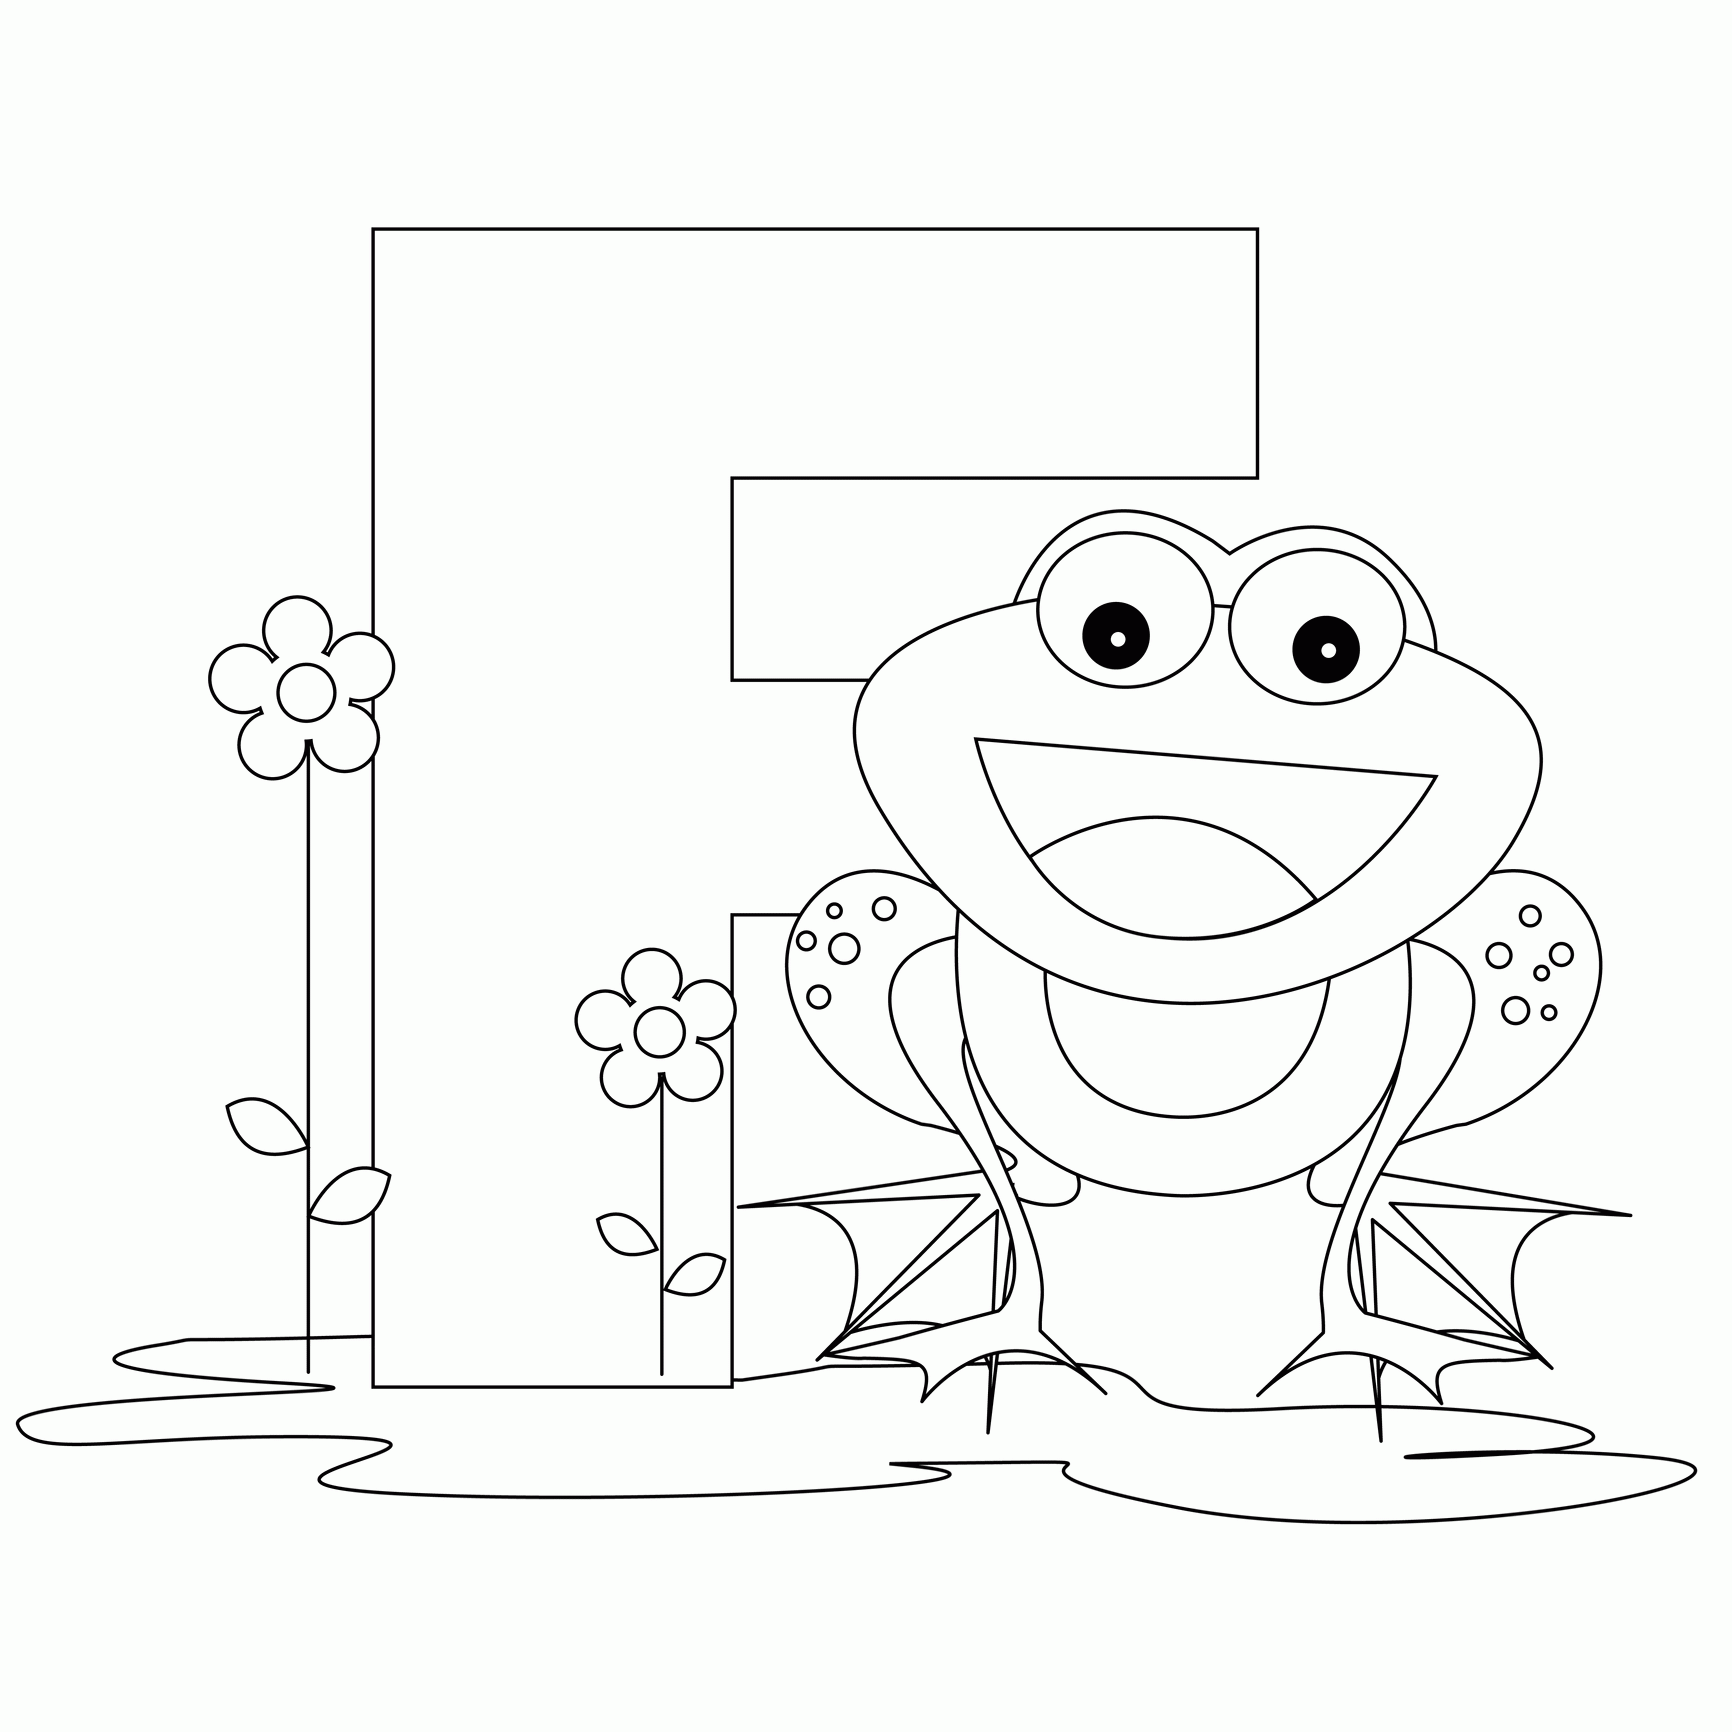 Letter F coloring pages to download and print for free